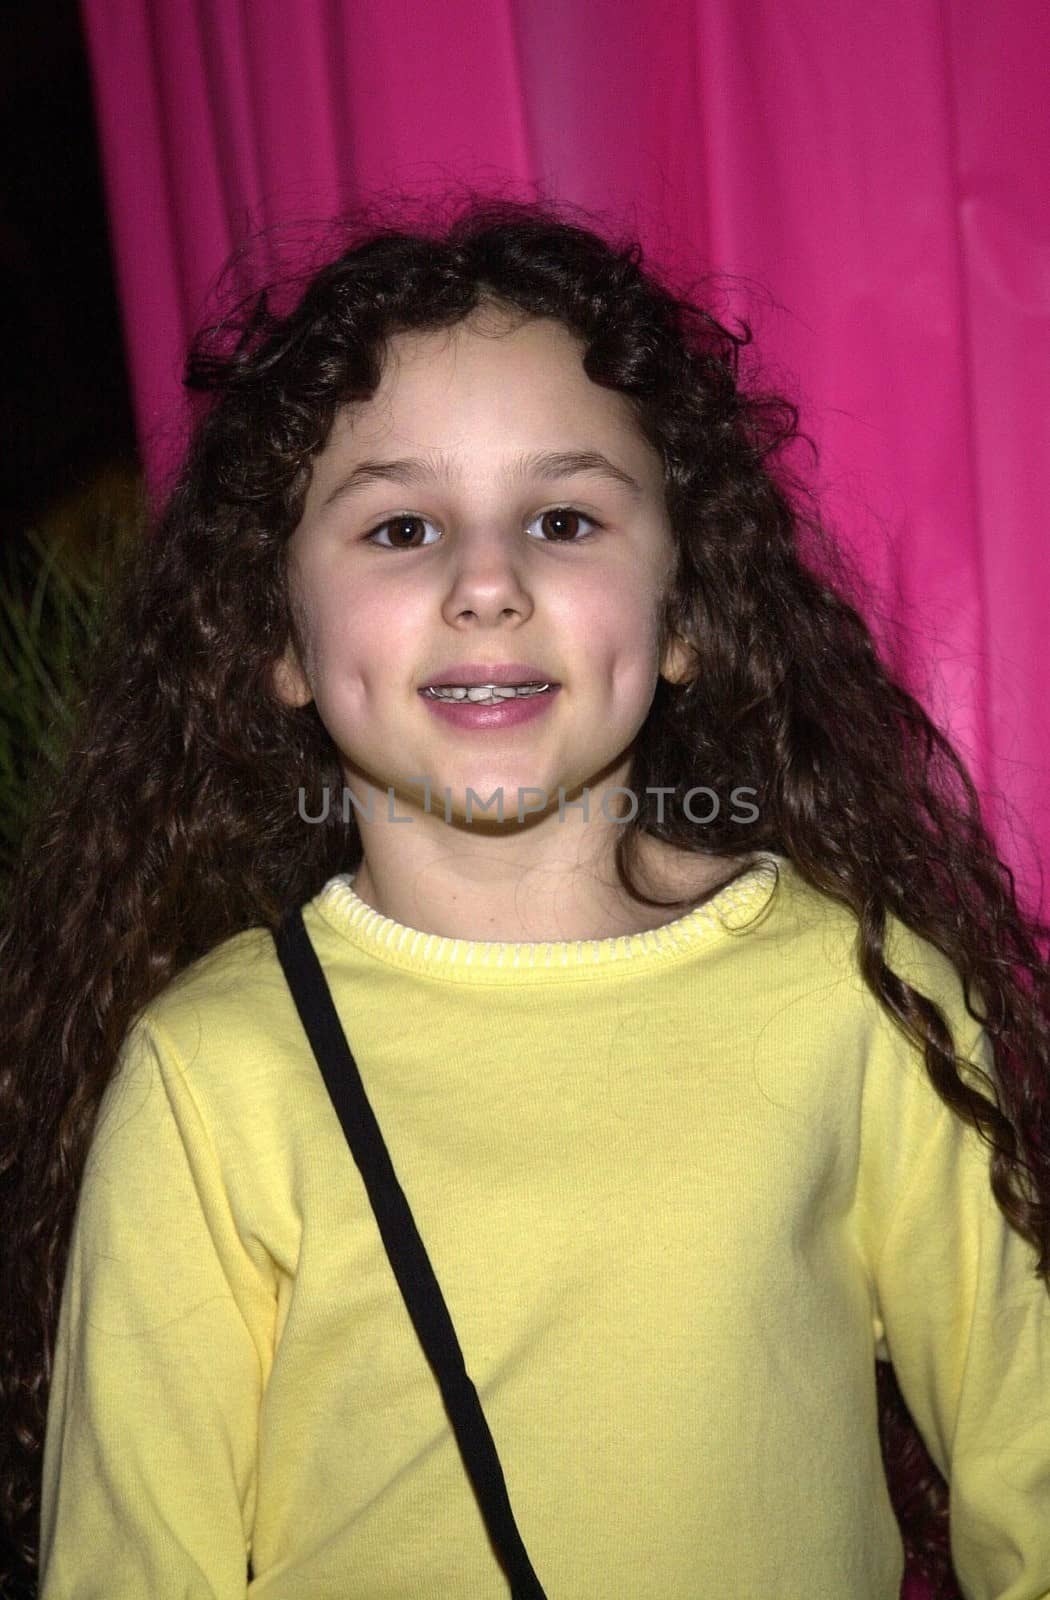 Halle Eisenberg at the premiere of Disney's "The Emperors New Groove" in Hollywood, 12-10-00